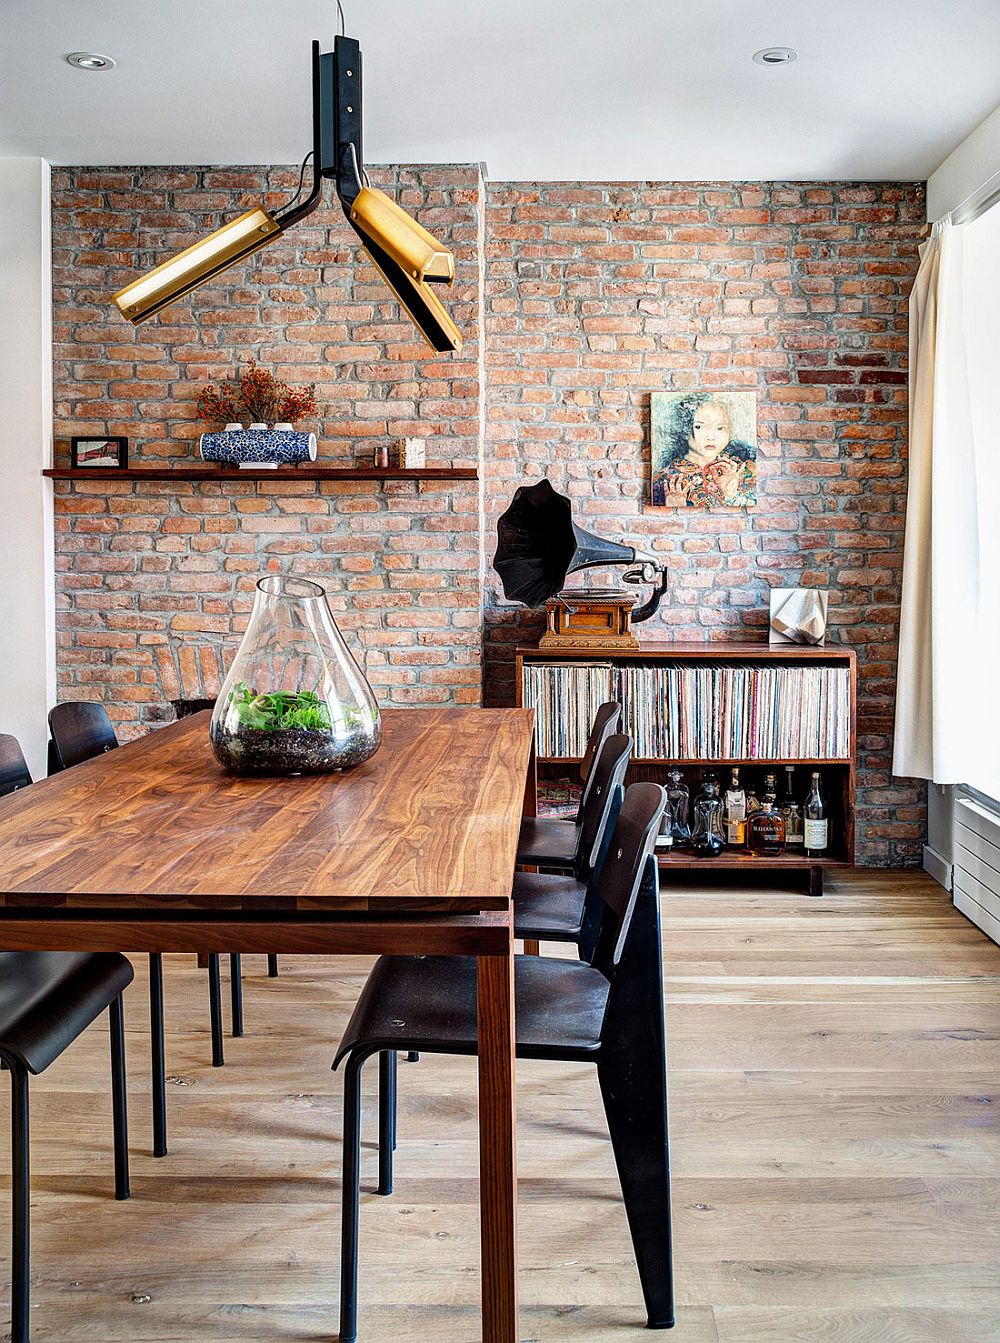 Industrail elements shape the renovated dining space with brick walls